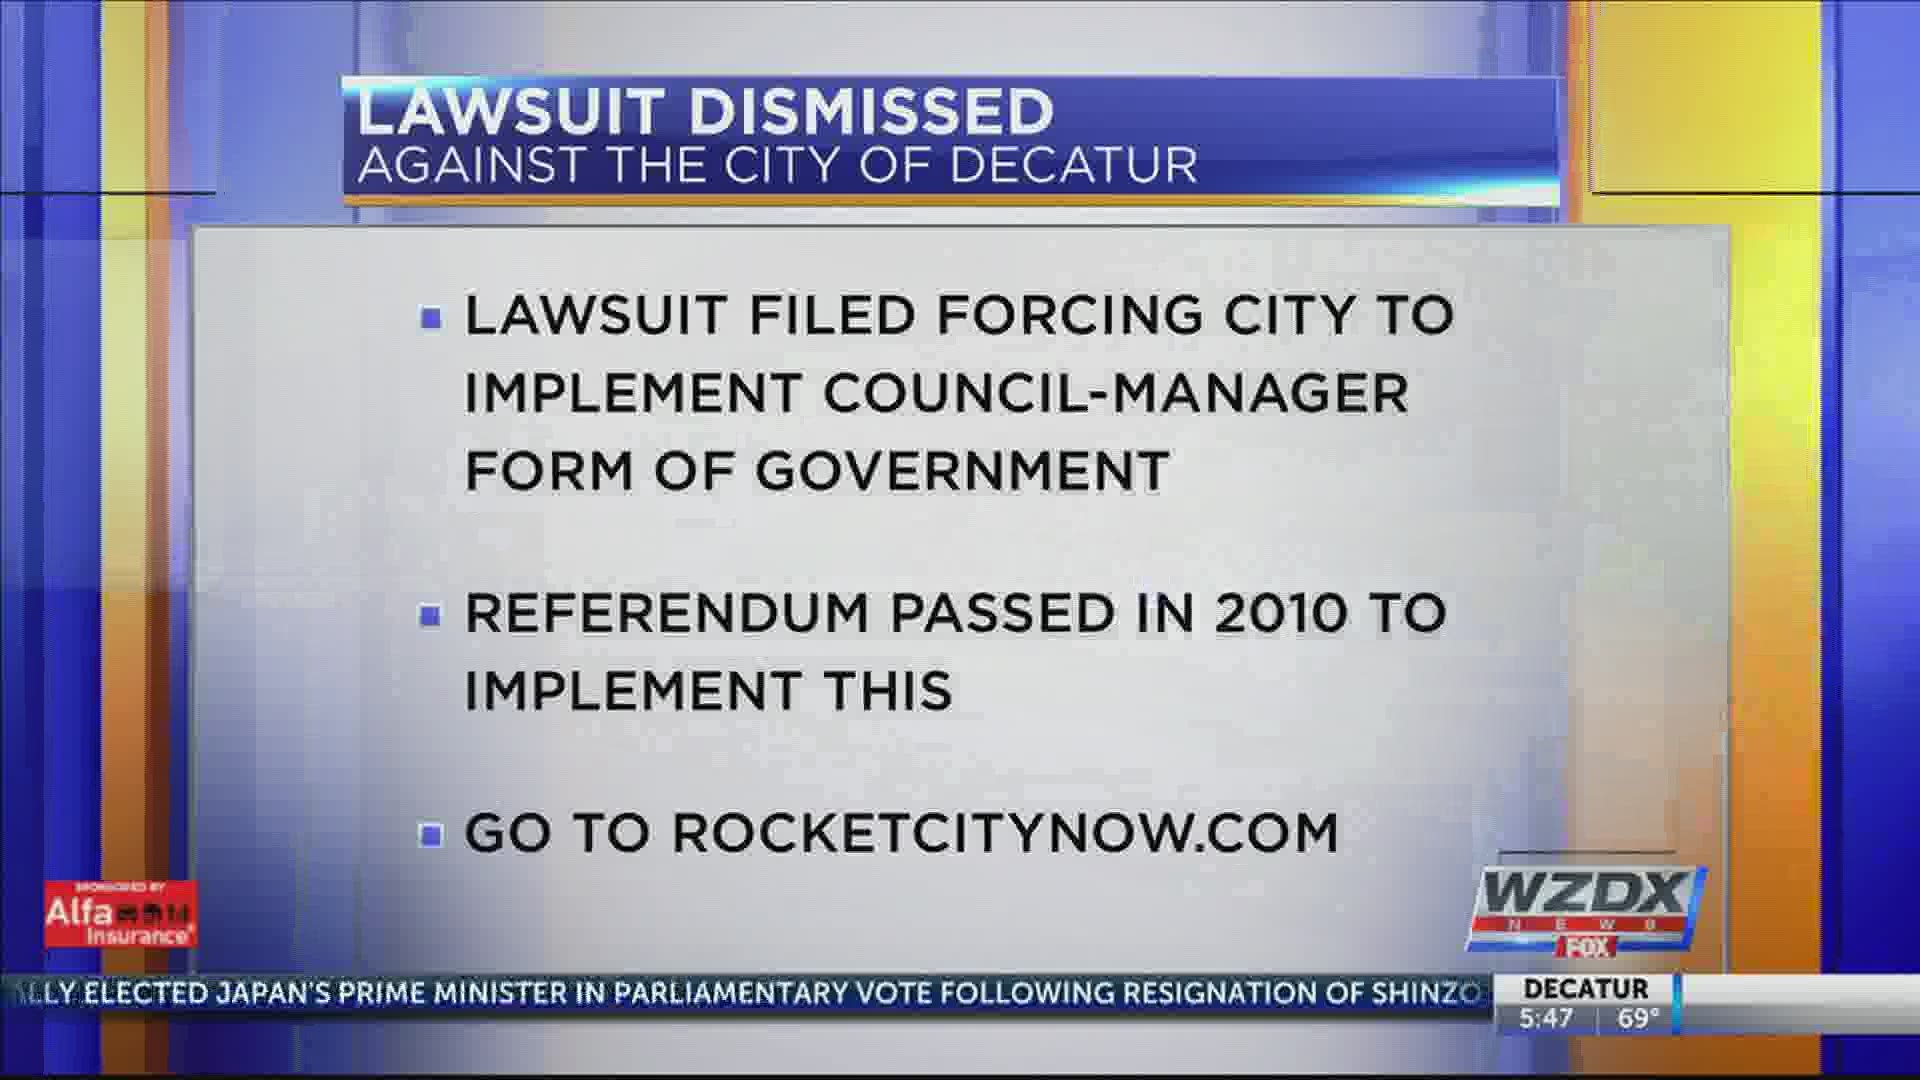 The lawsuit was filed to force the City to change its form of government after a referendum passed in 2010.